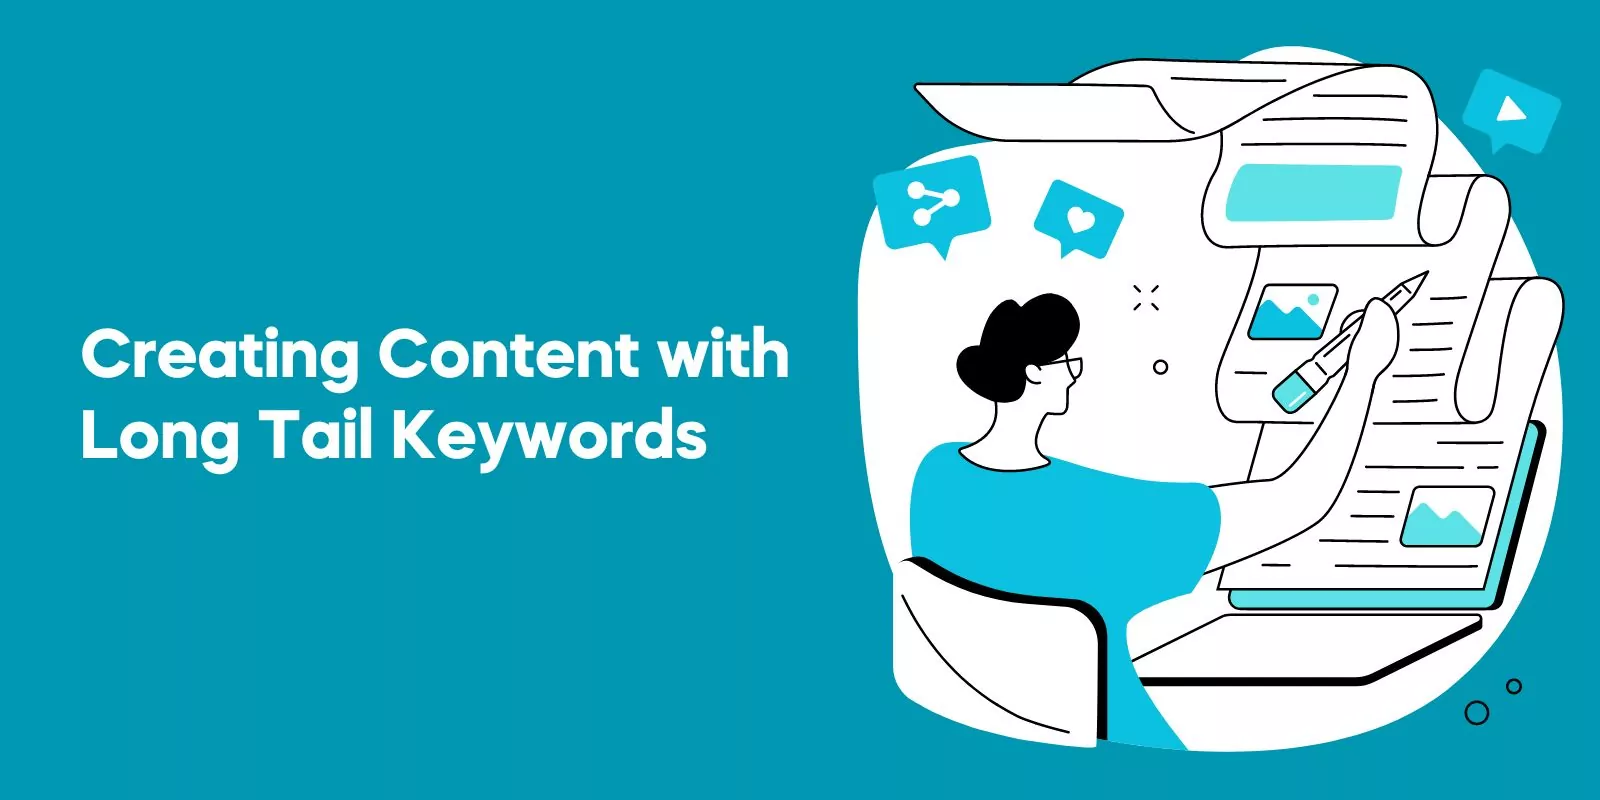 Creating Content with Long Tail Keywords